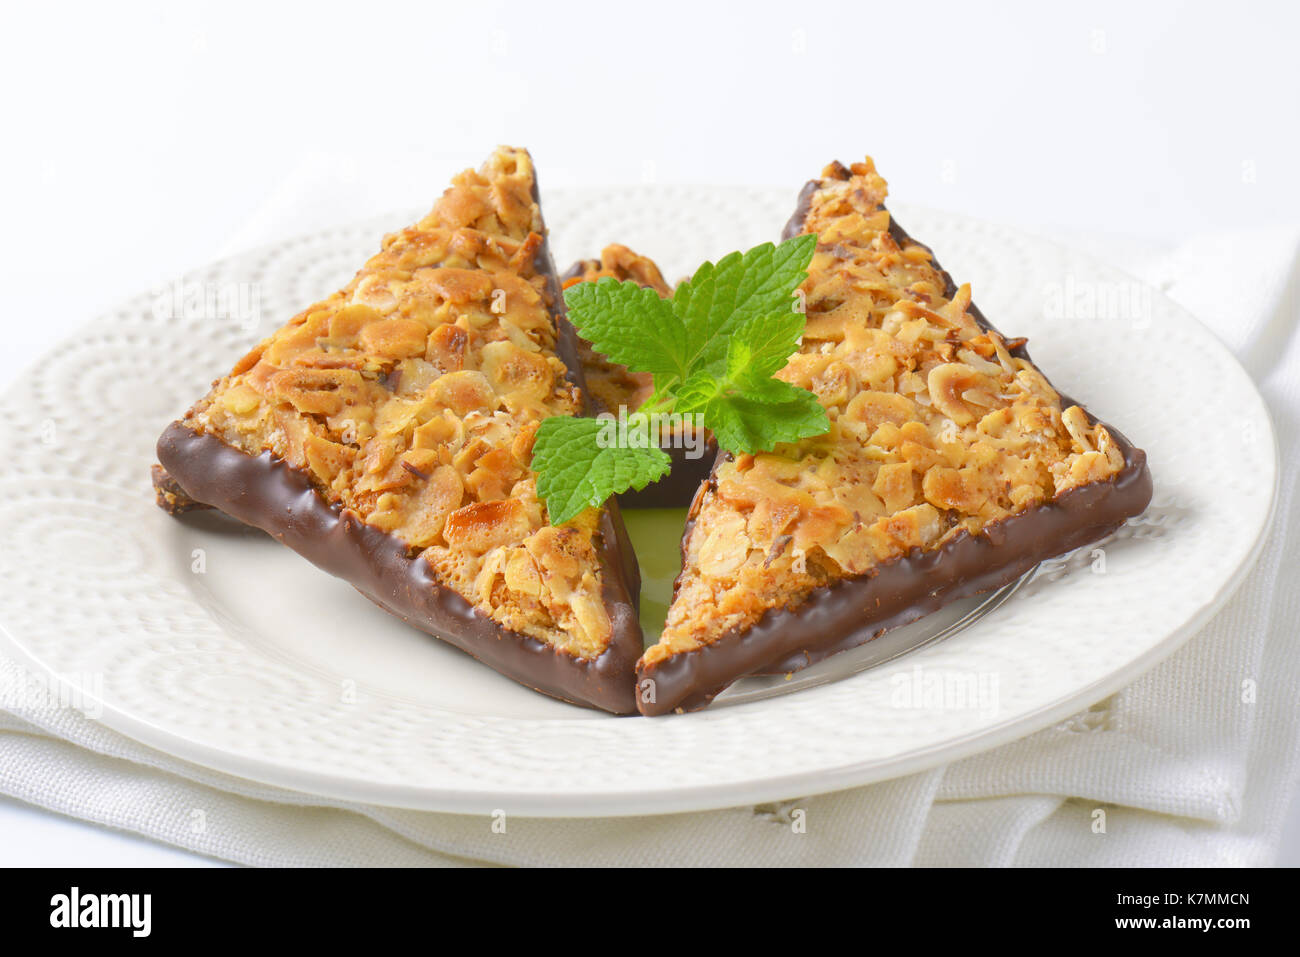 Triangle nut bars dipped in chocolate Stock Photo